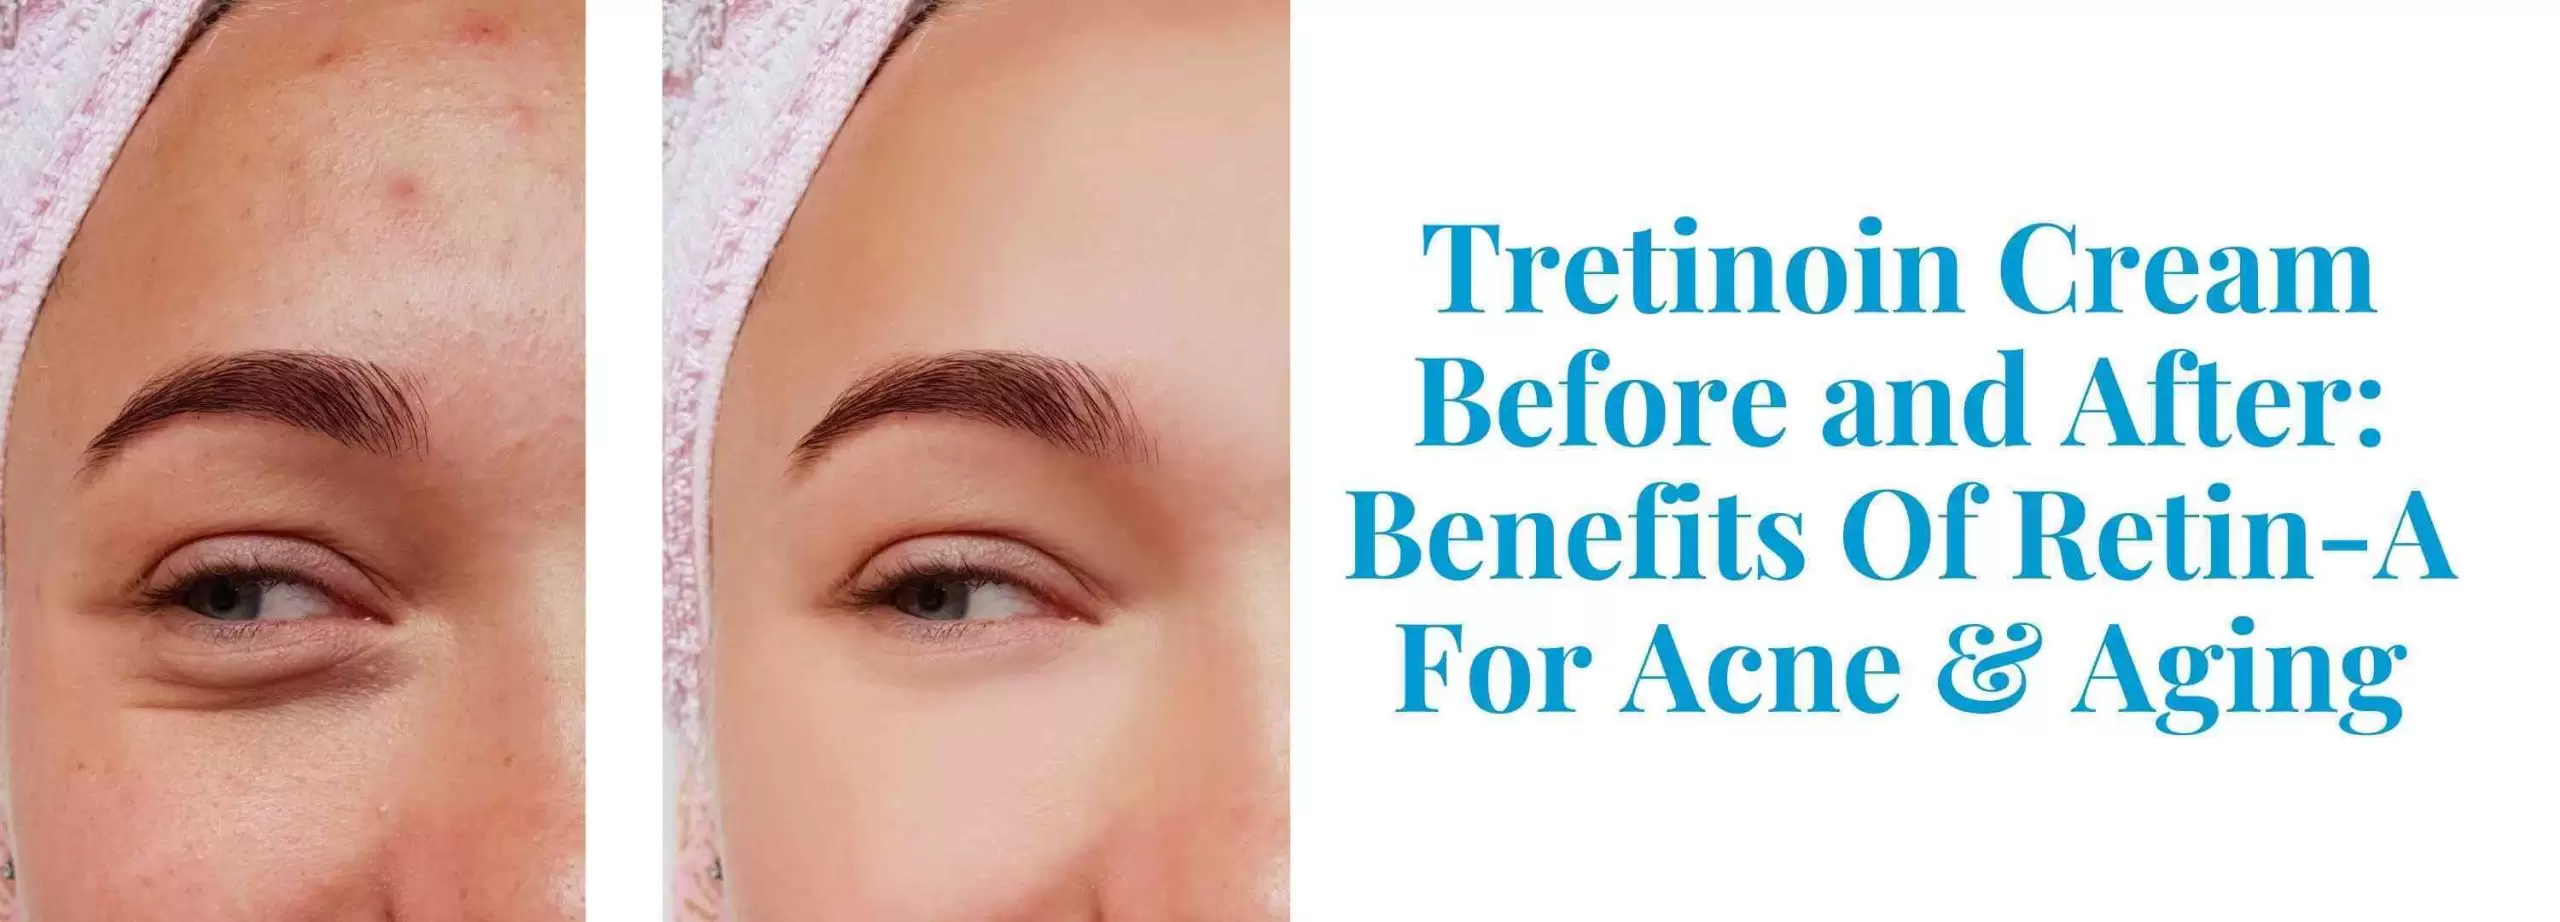 Tretinoin cream before and after beenfits of retin-a for acne & aging